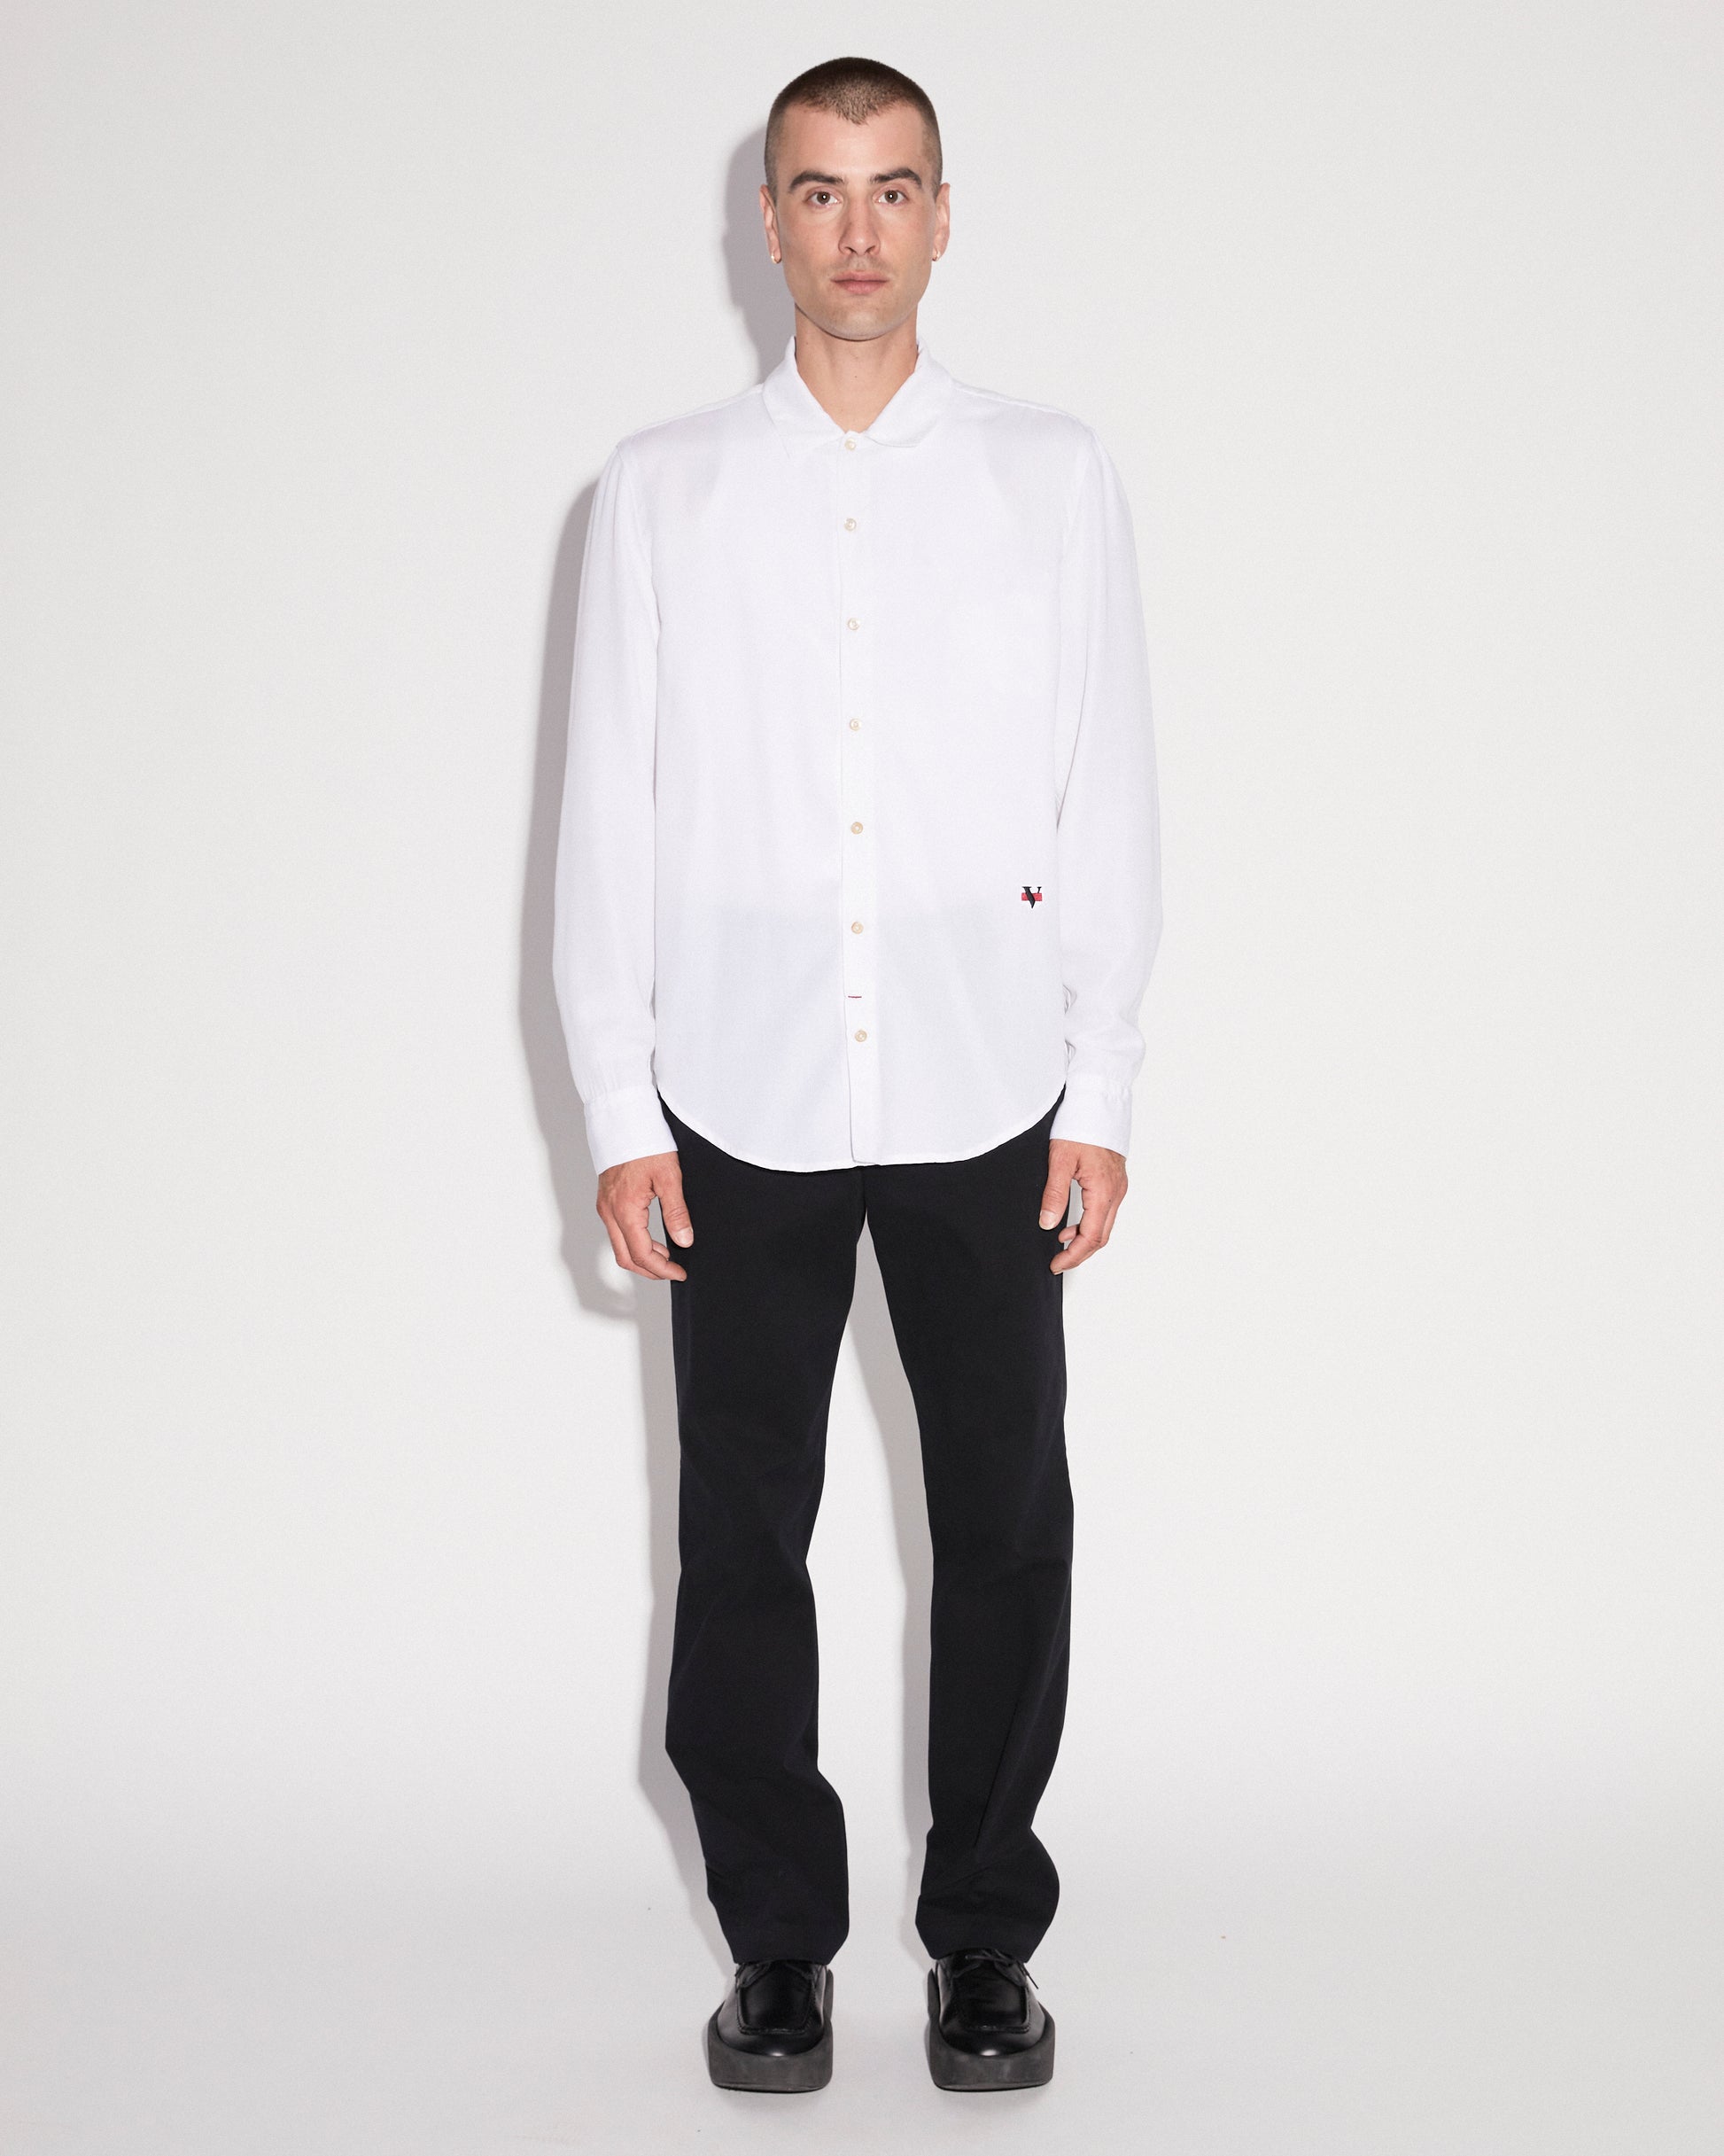 Man standing wearing a white long sleeve button up shirt with black pants